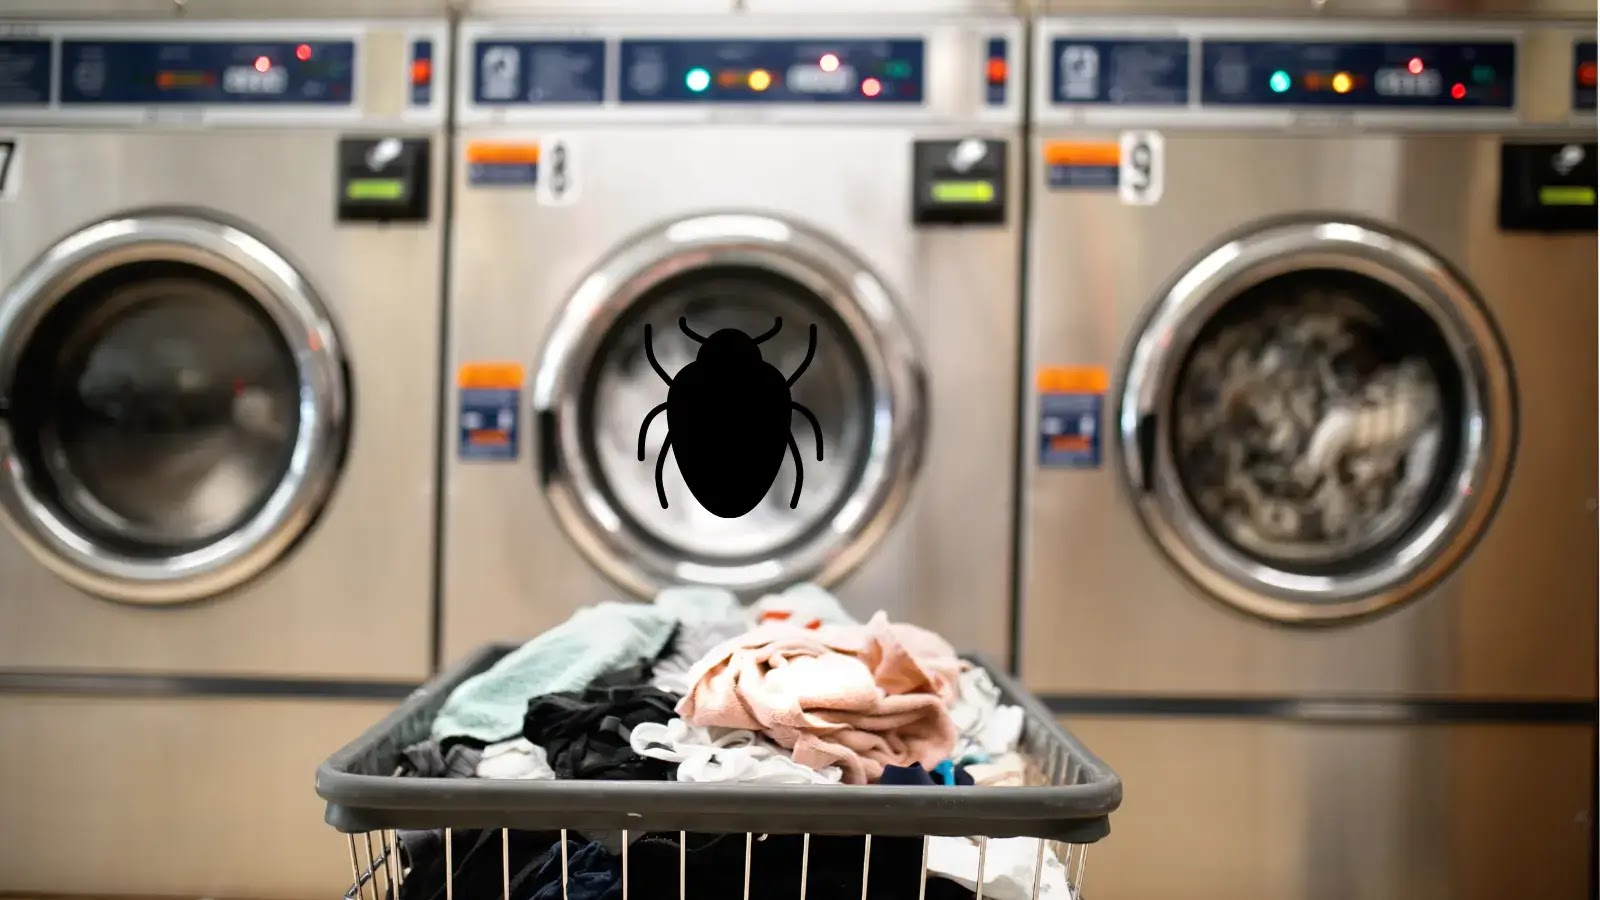 Students uncover security flaw that could allow millions to do their laundry for free